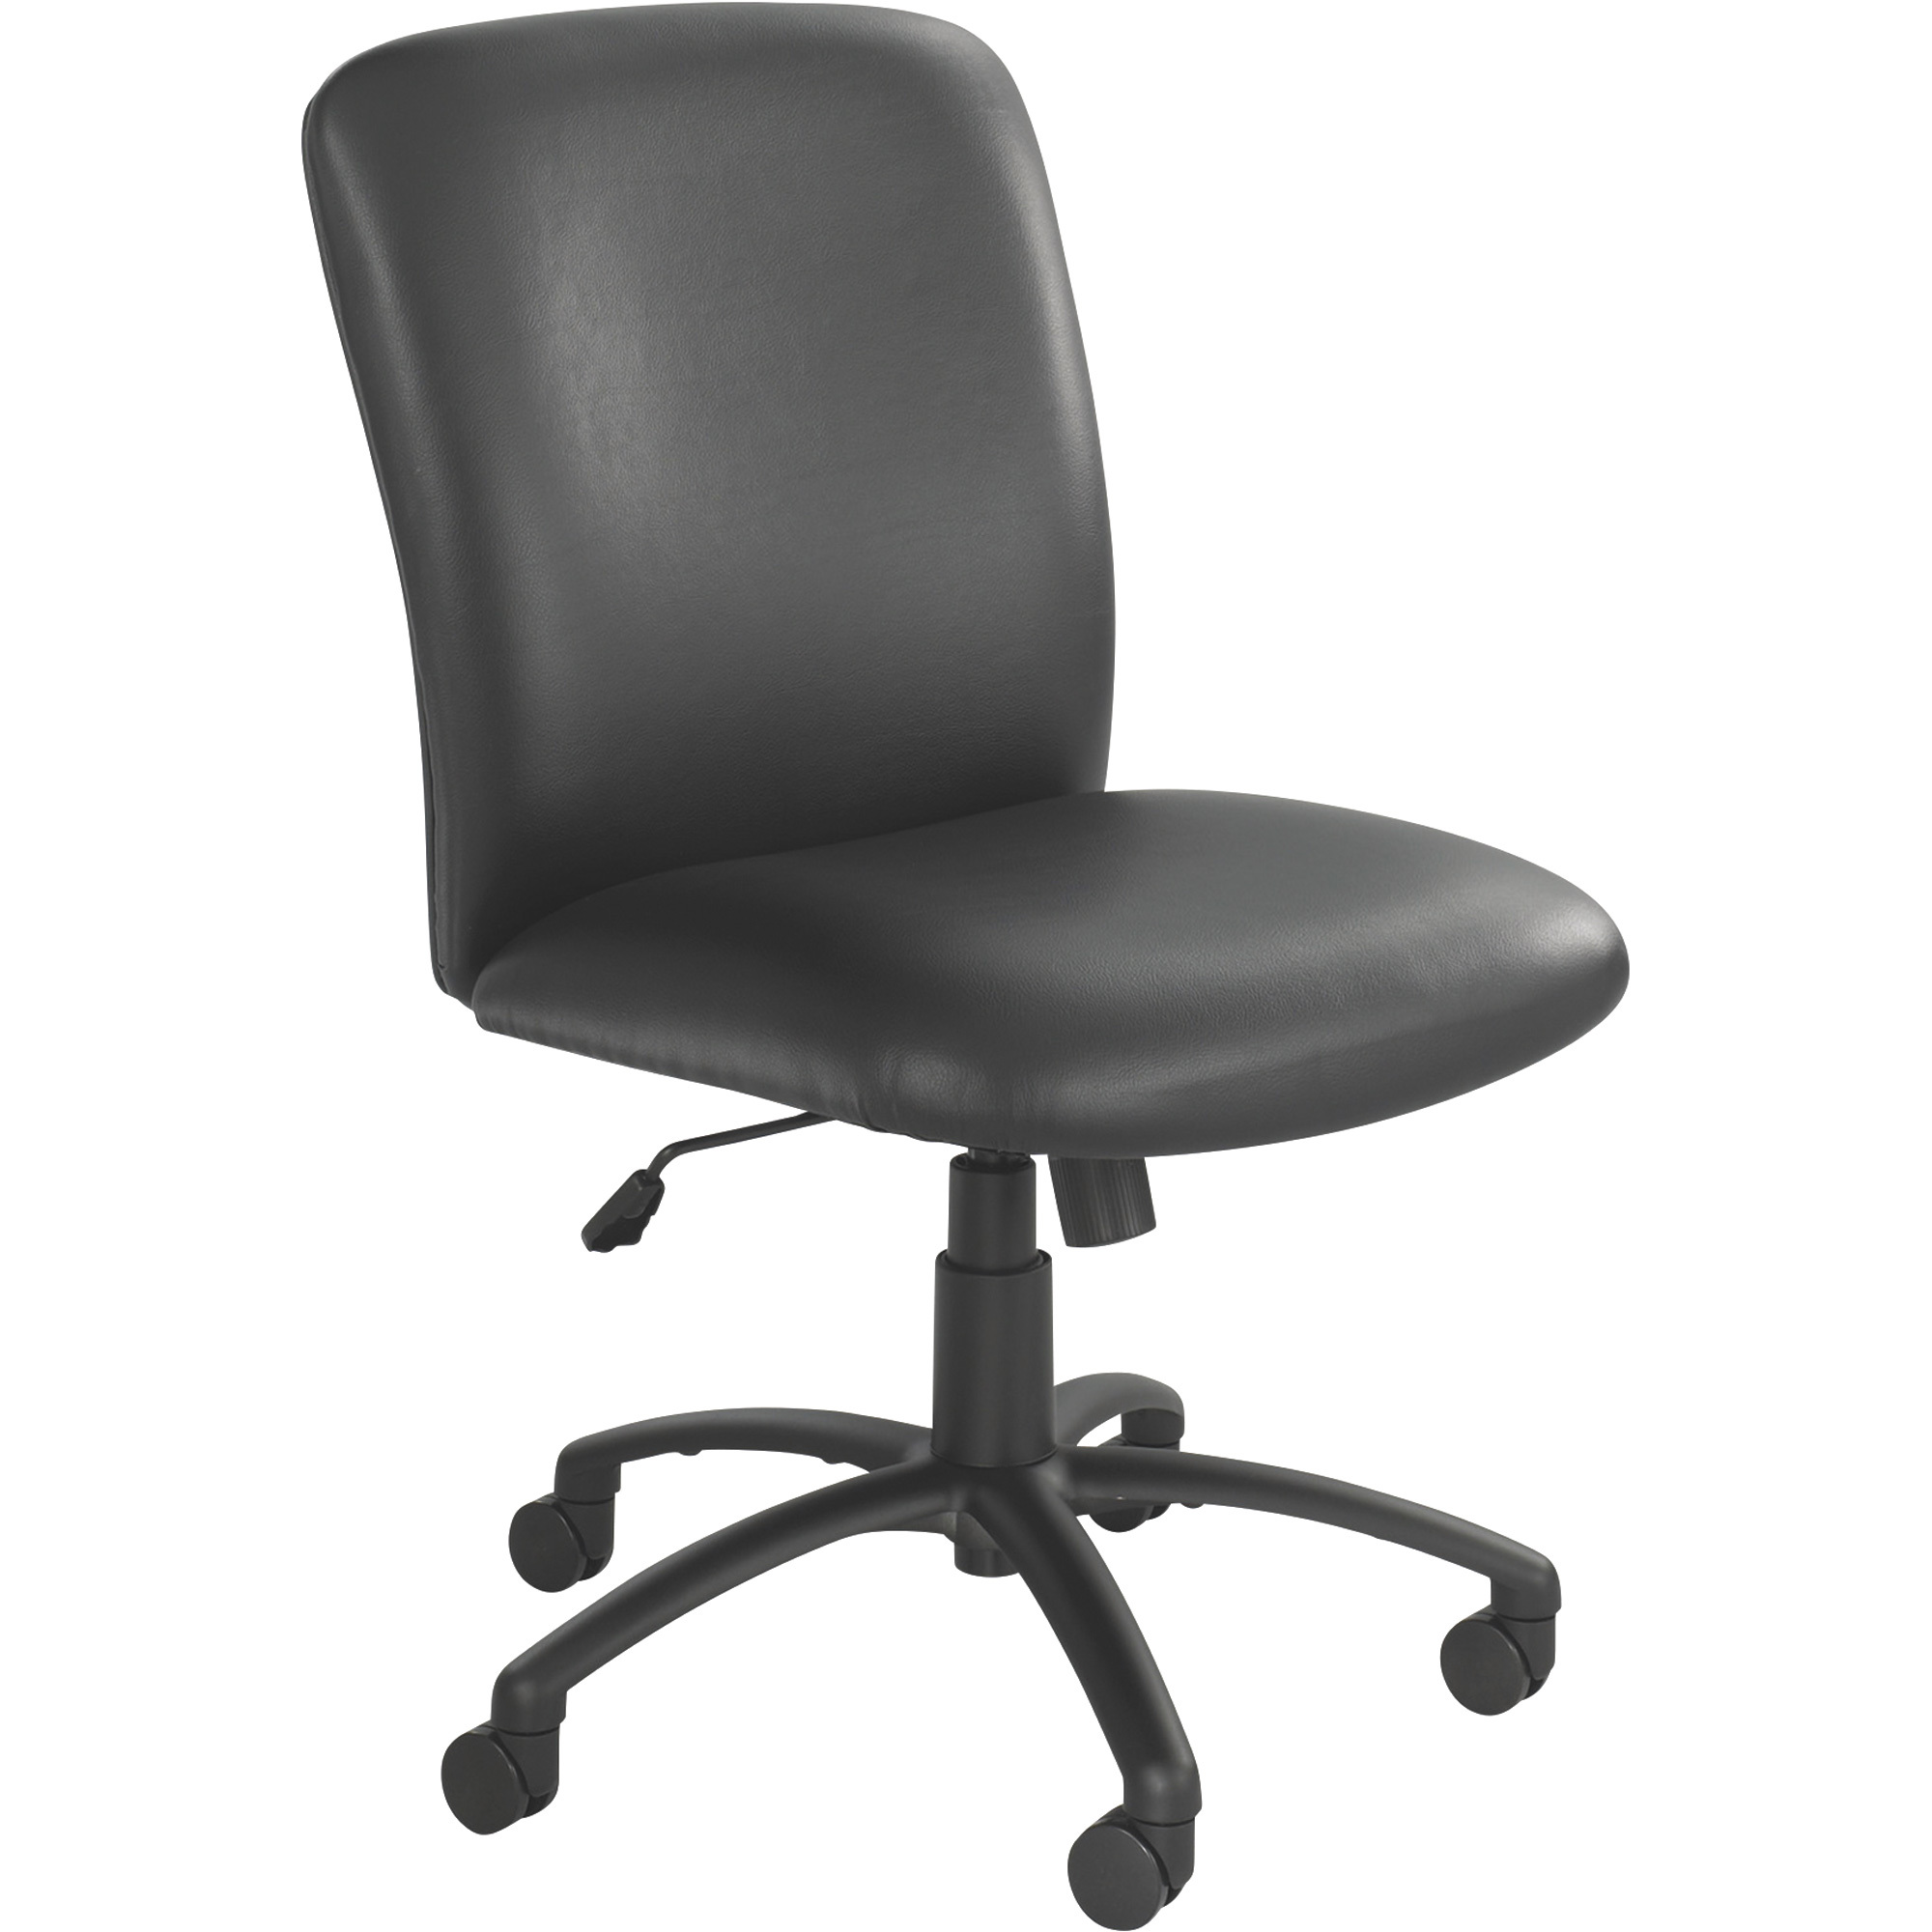 Safco Uber Big and Tall High Back Chair — Black Vinyl, Model 3490BV -  SAFCO Products